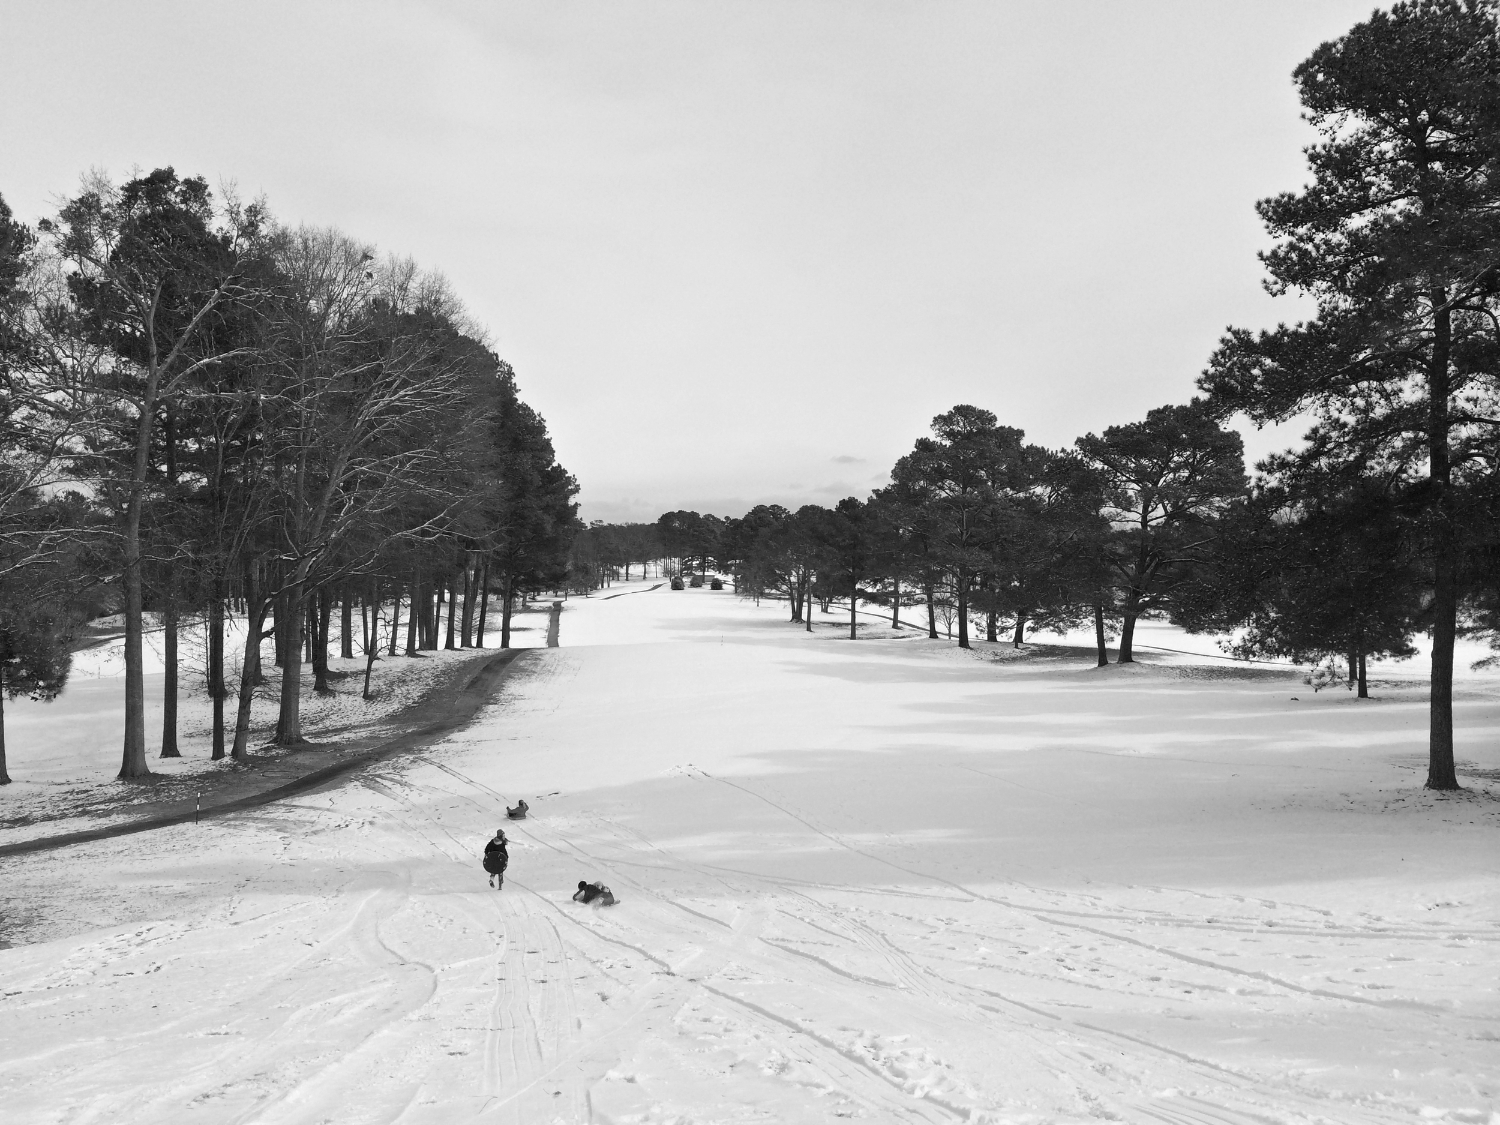  Sledding fairways at the Monroe Golf and Country Club 